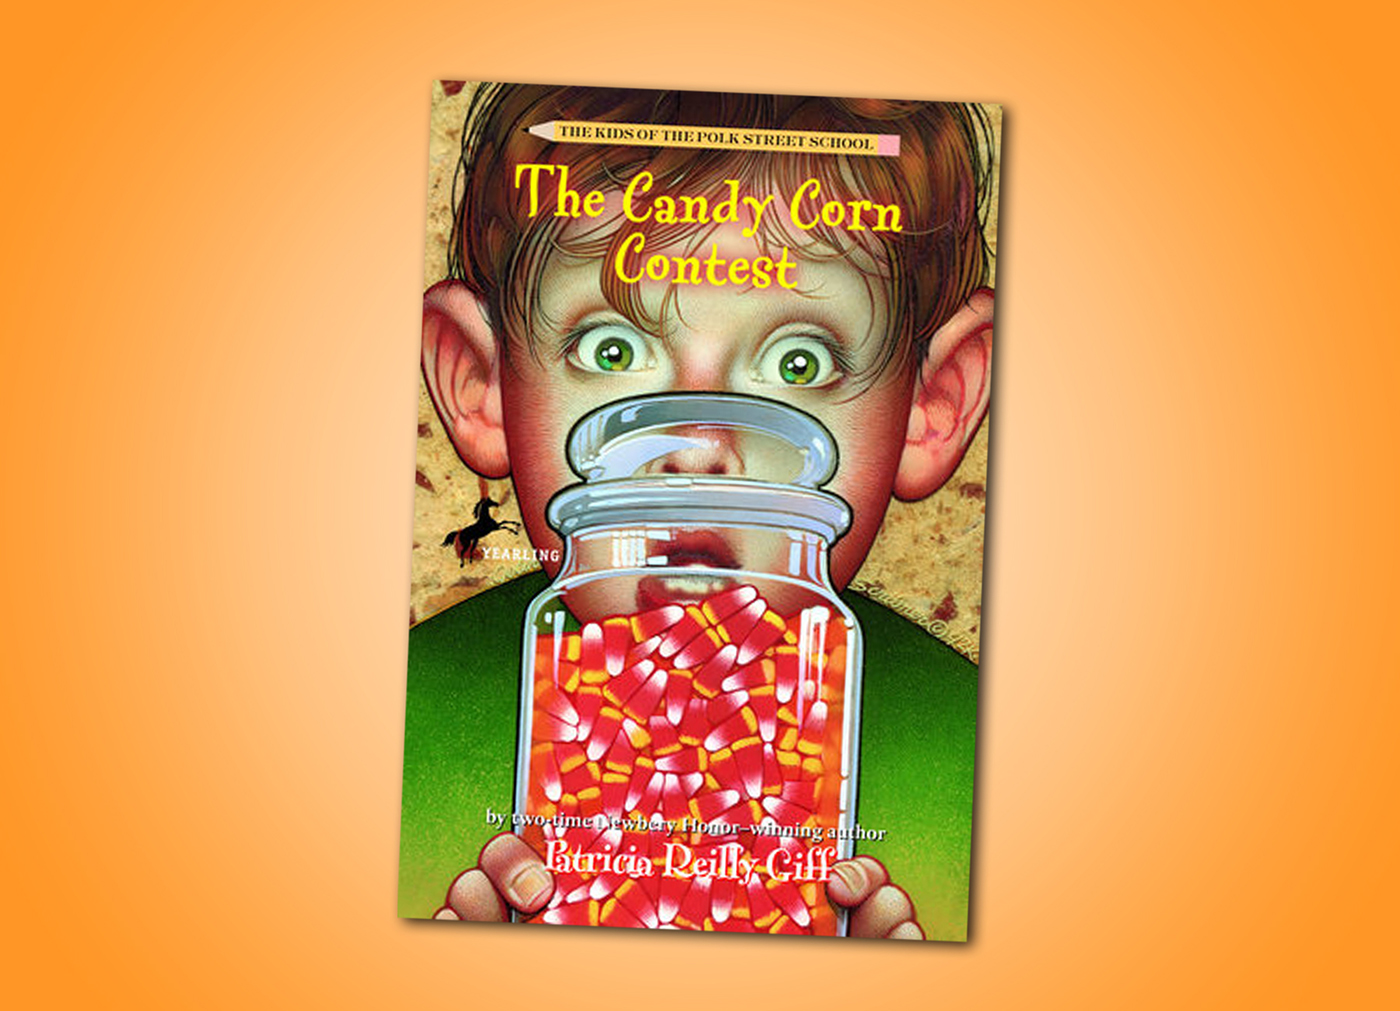 The Candy Corn Contest by Patricia Reilly Giff